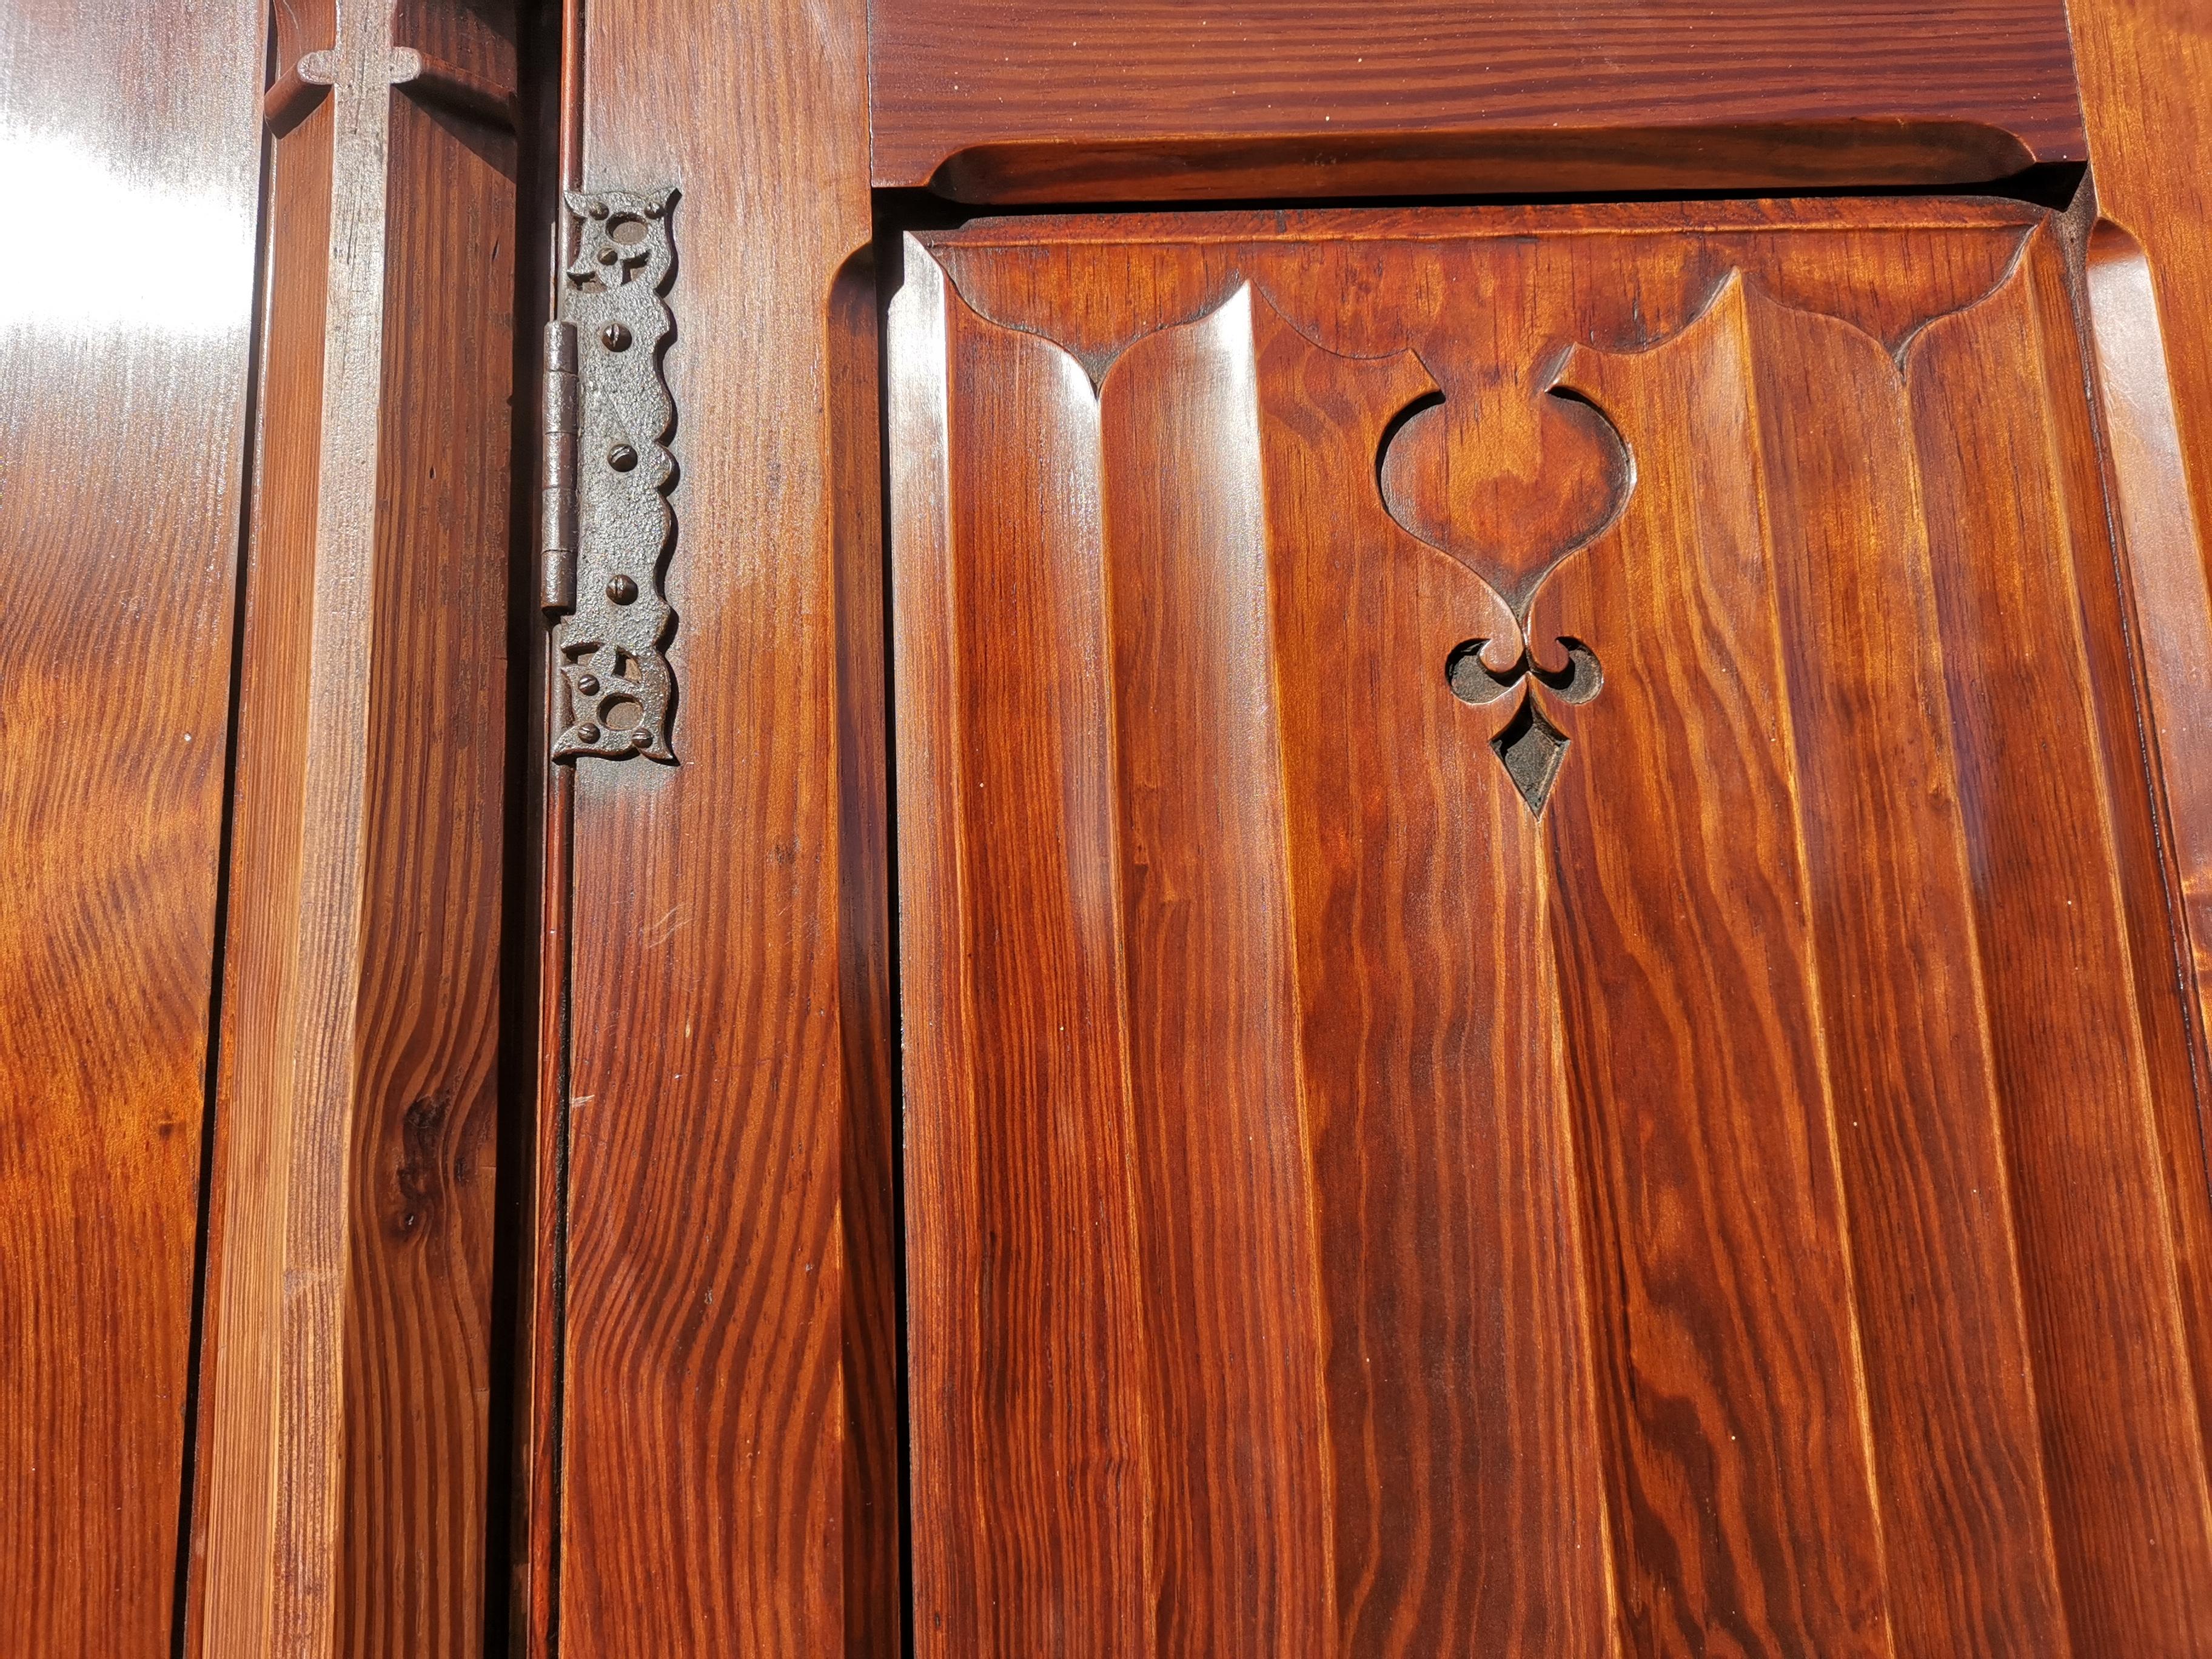 A W N Pugin. Gothic Revival Four Door Pitch Pine Wardrobe with Linenfold Panels For Sale 3